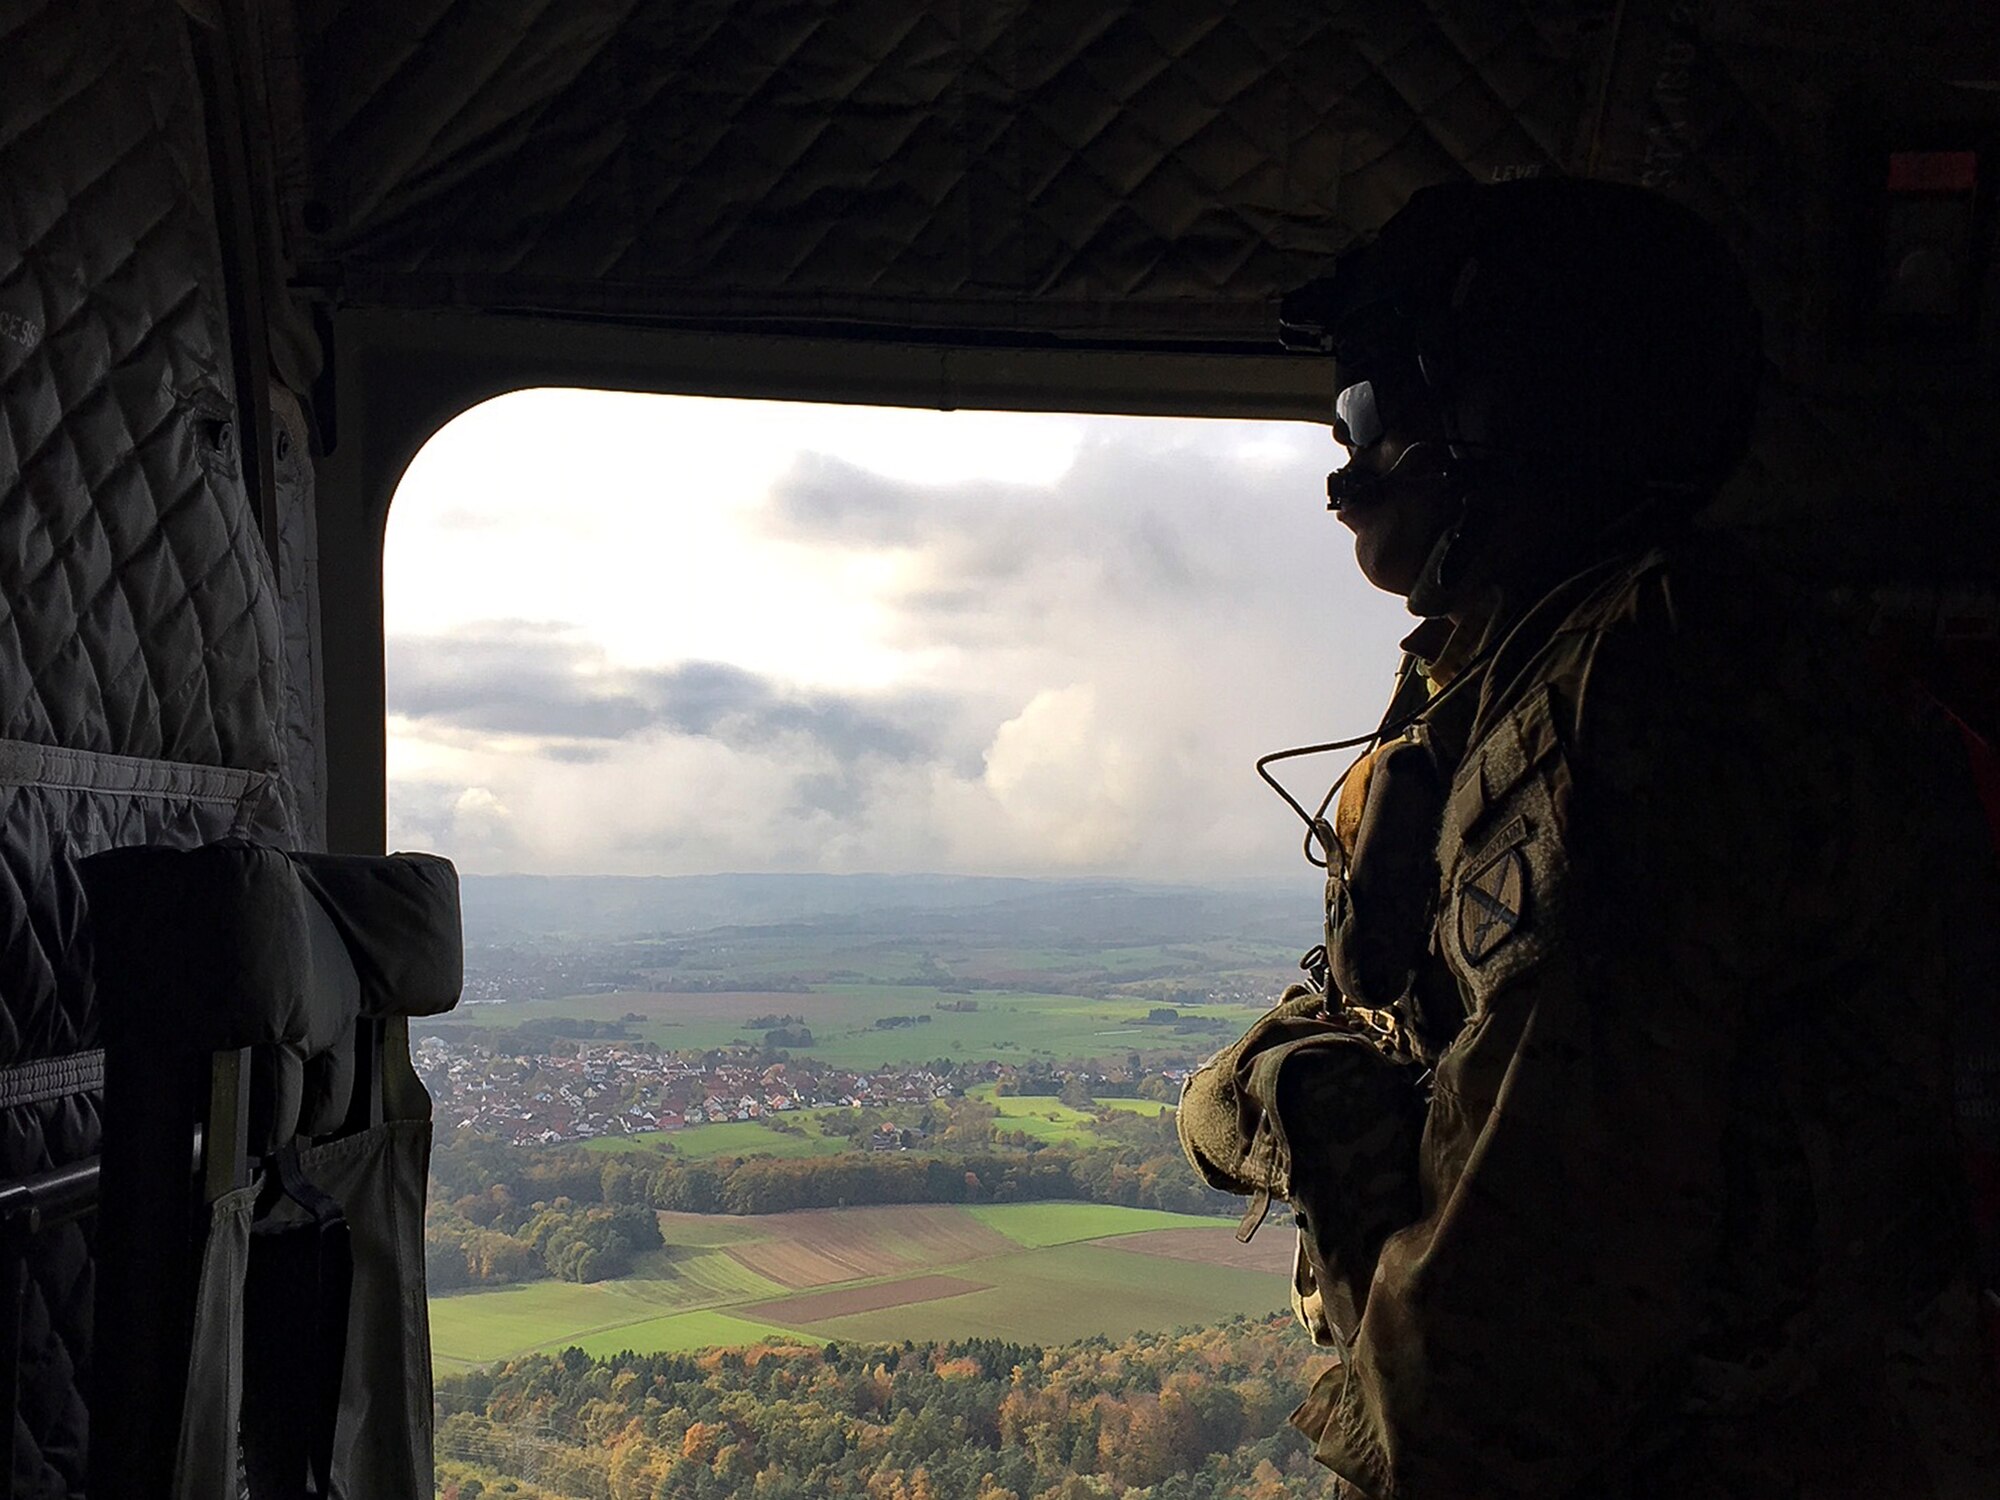 Airmen from the 424th Air Base Squadron, a geographically separated unit of Ramstein’s 86th Airlift Wing, supported a rotation of a U.S. Army Combat Aviation Brigade on Chièvres Air Base, Belgium, Oct. 20, 2017, and supported throughout the duration of Operation Atlantic Resolve at Powidz Air Base, Poland.